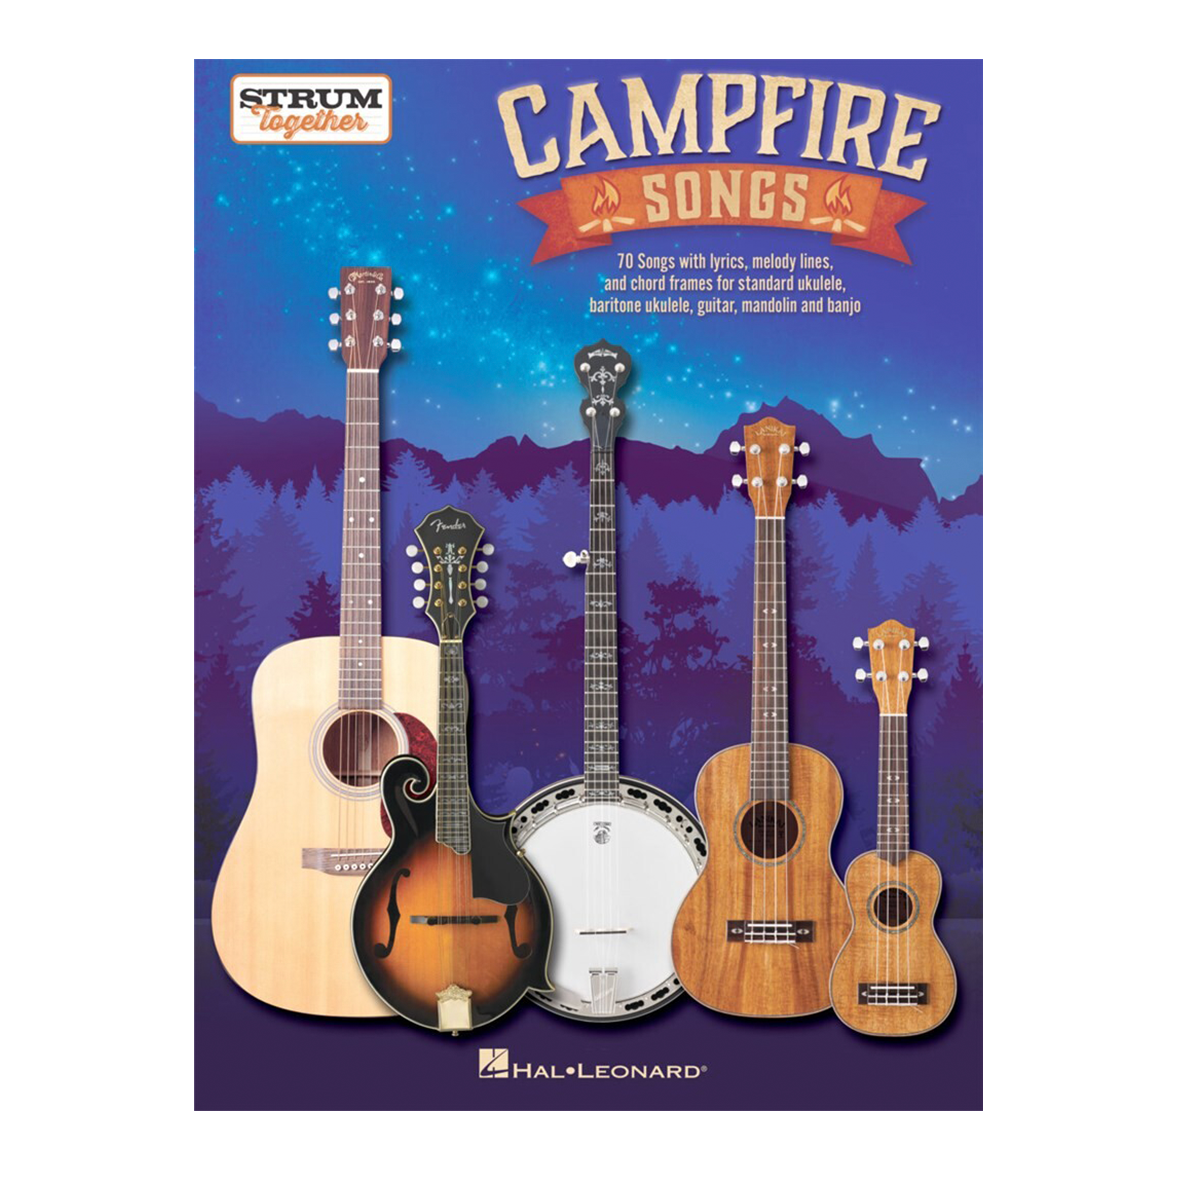 Strum Together: Campfire Songs Songbook for Piano, Vocal & Guitar